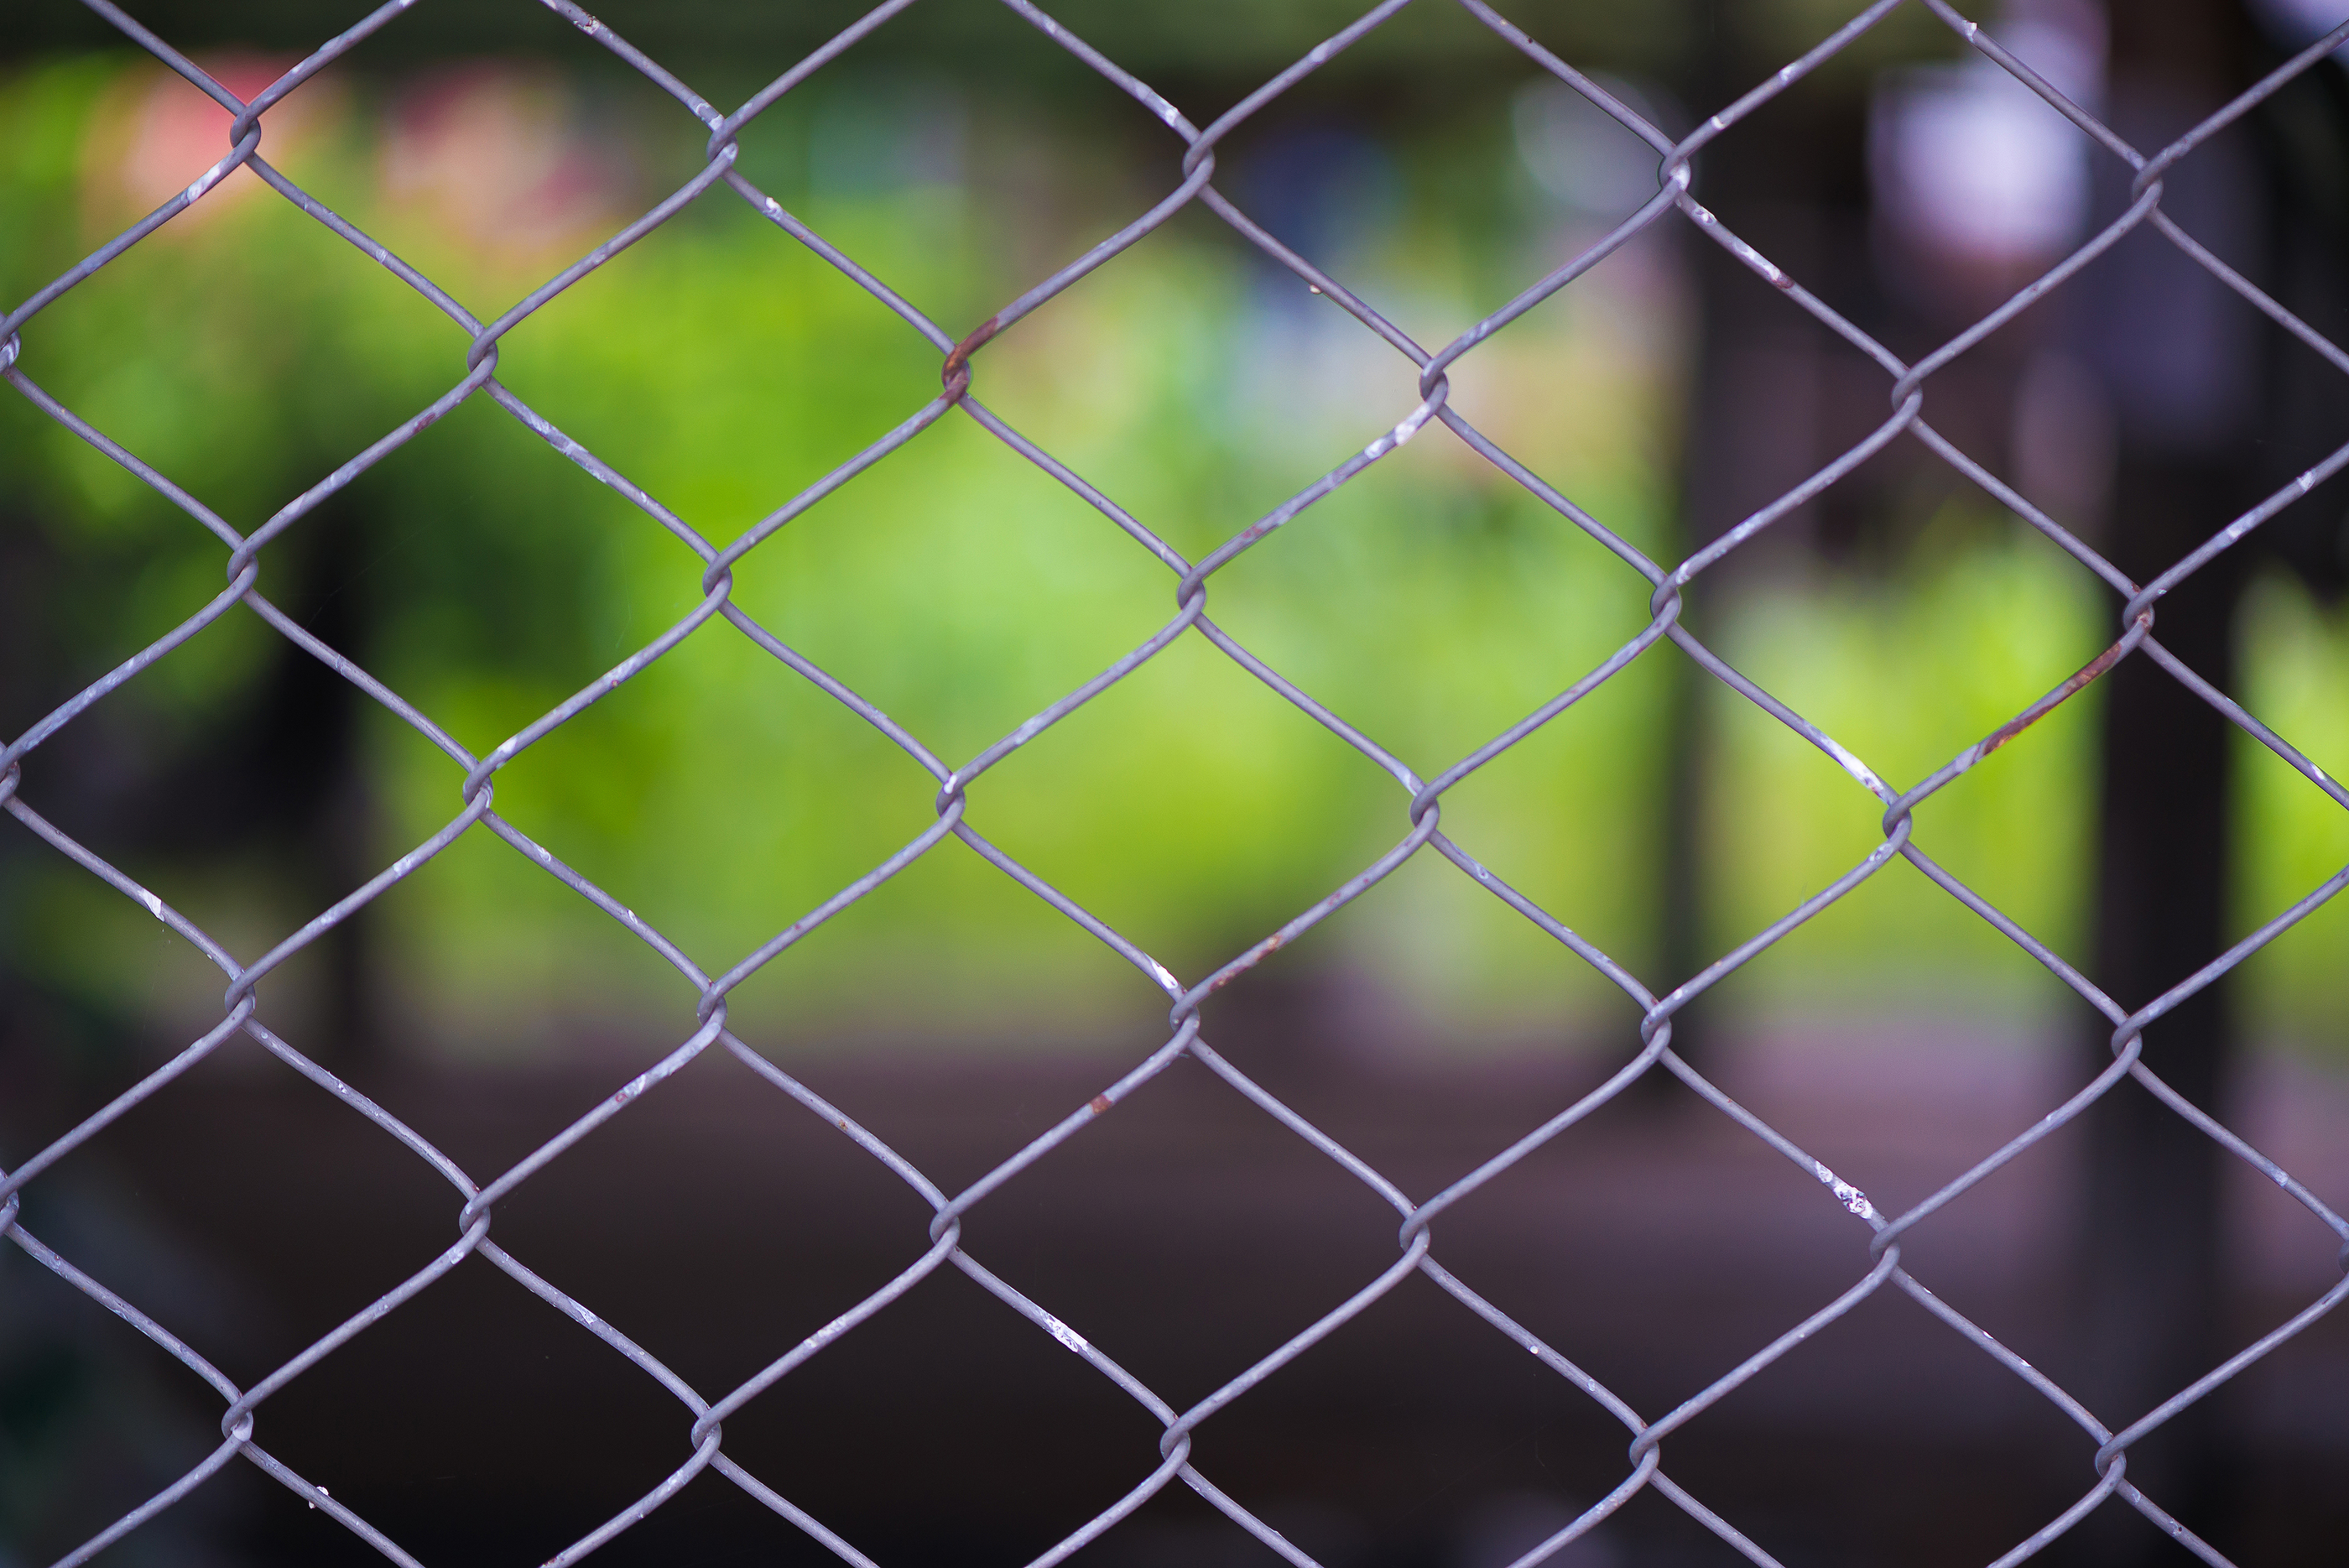 Rusty Chain Link Fence Of Steel Netting On Blur Background.